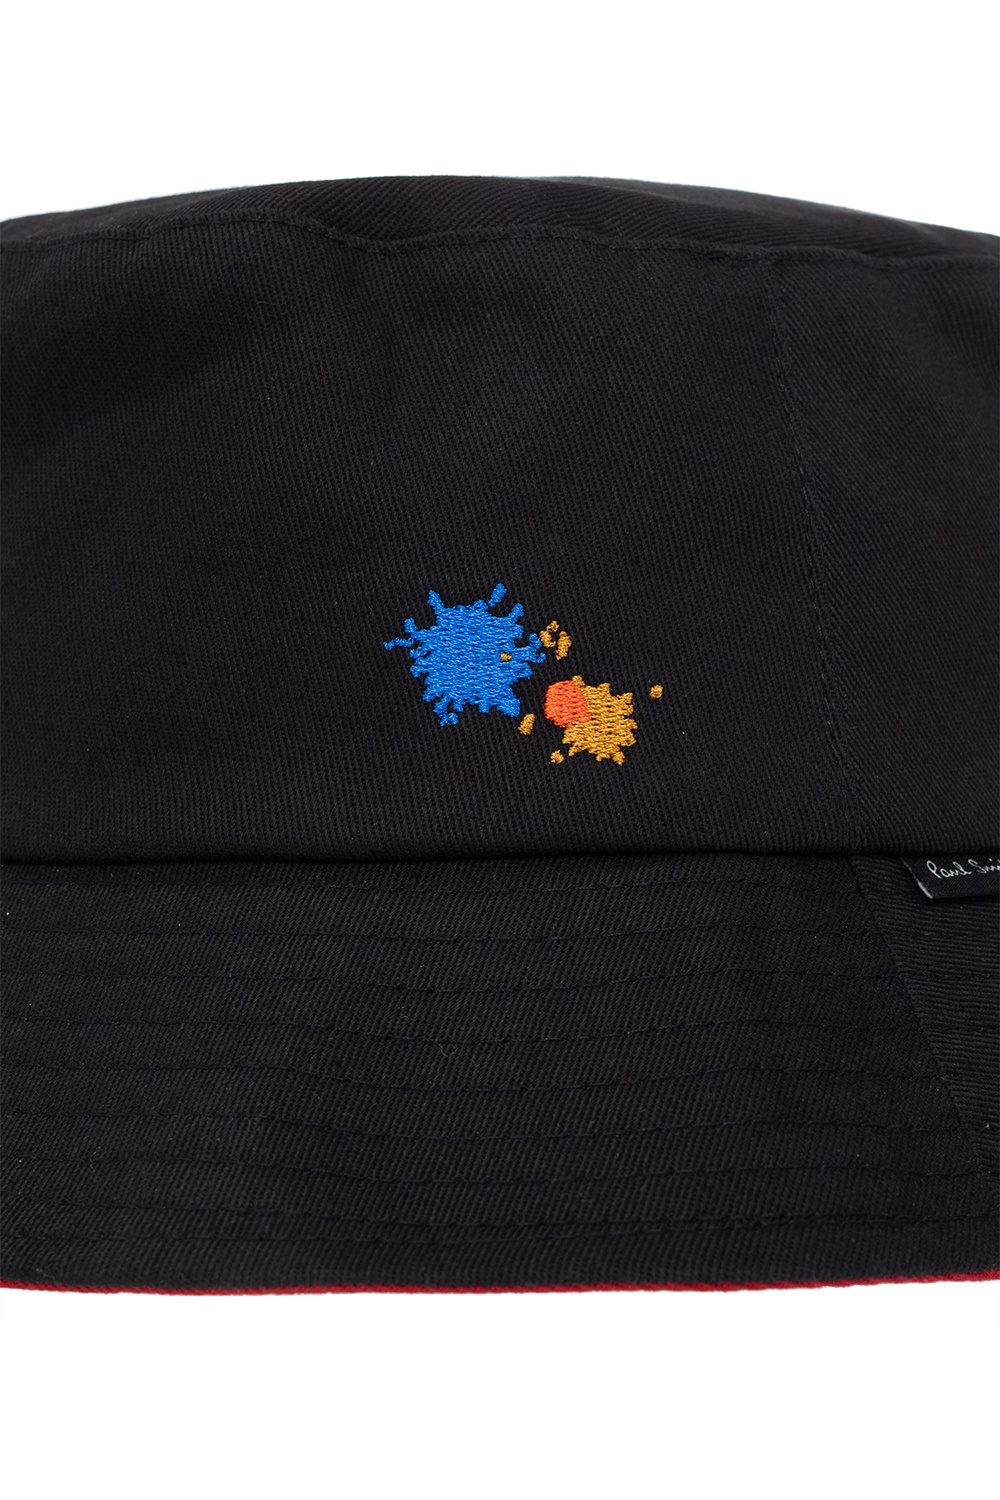 Paul Smith Embroidered bucket hat